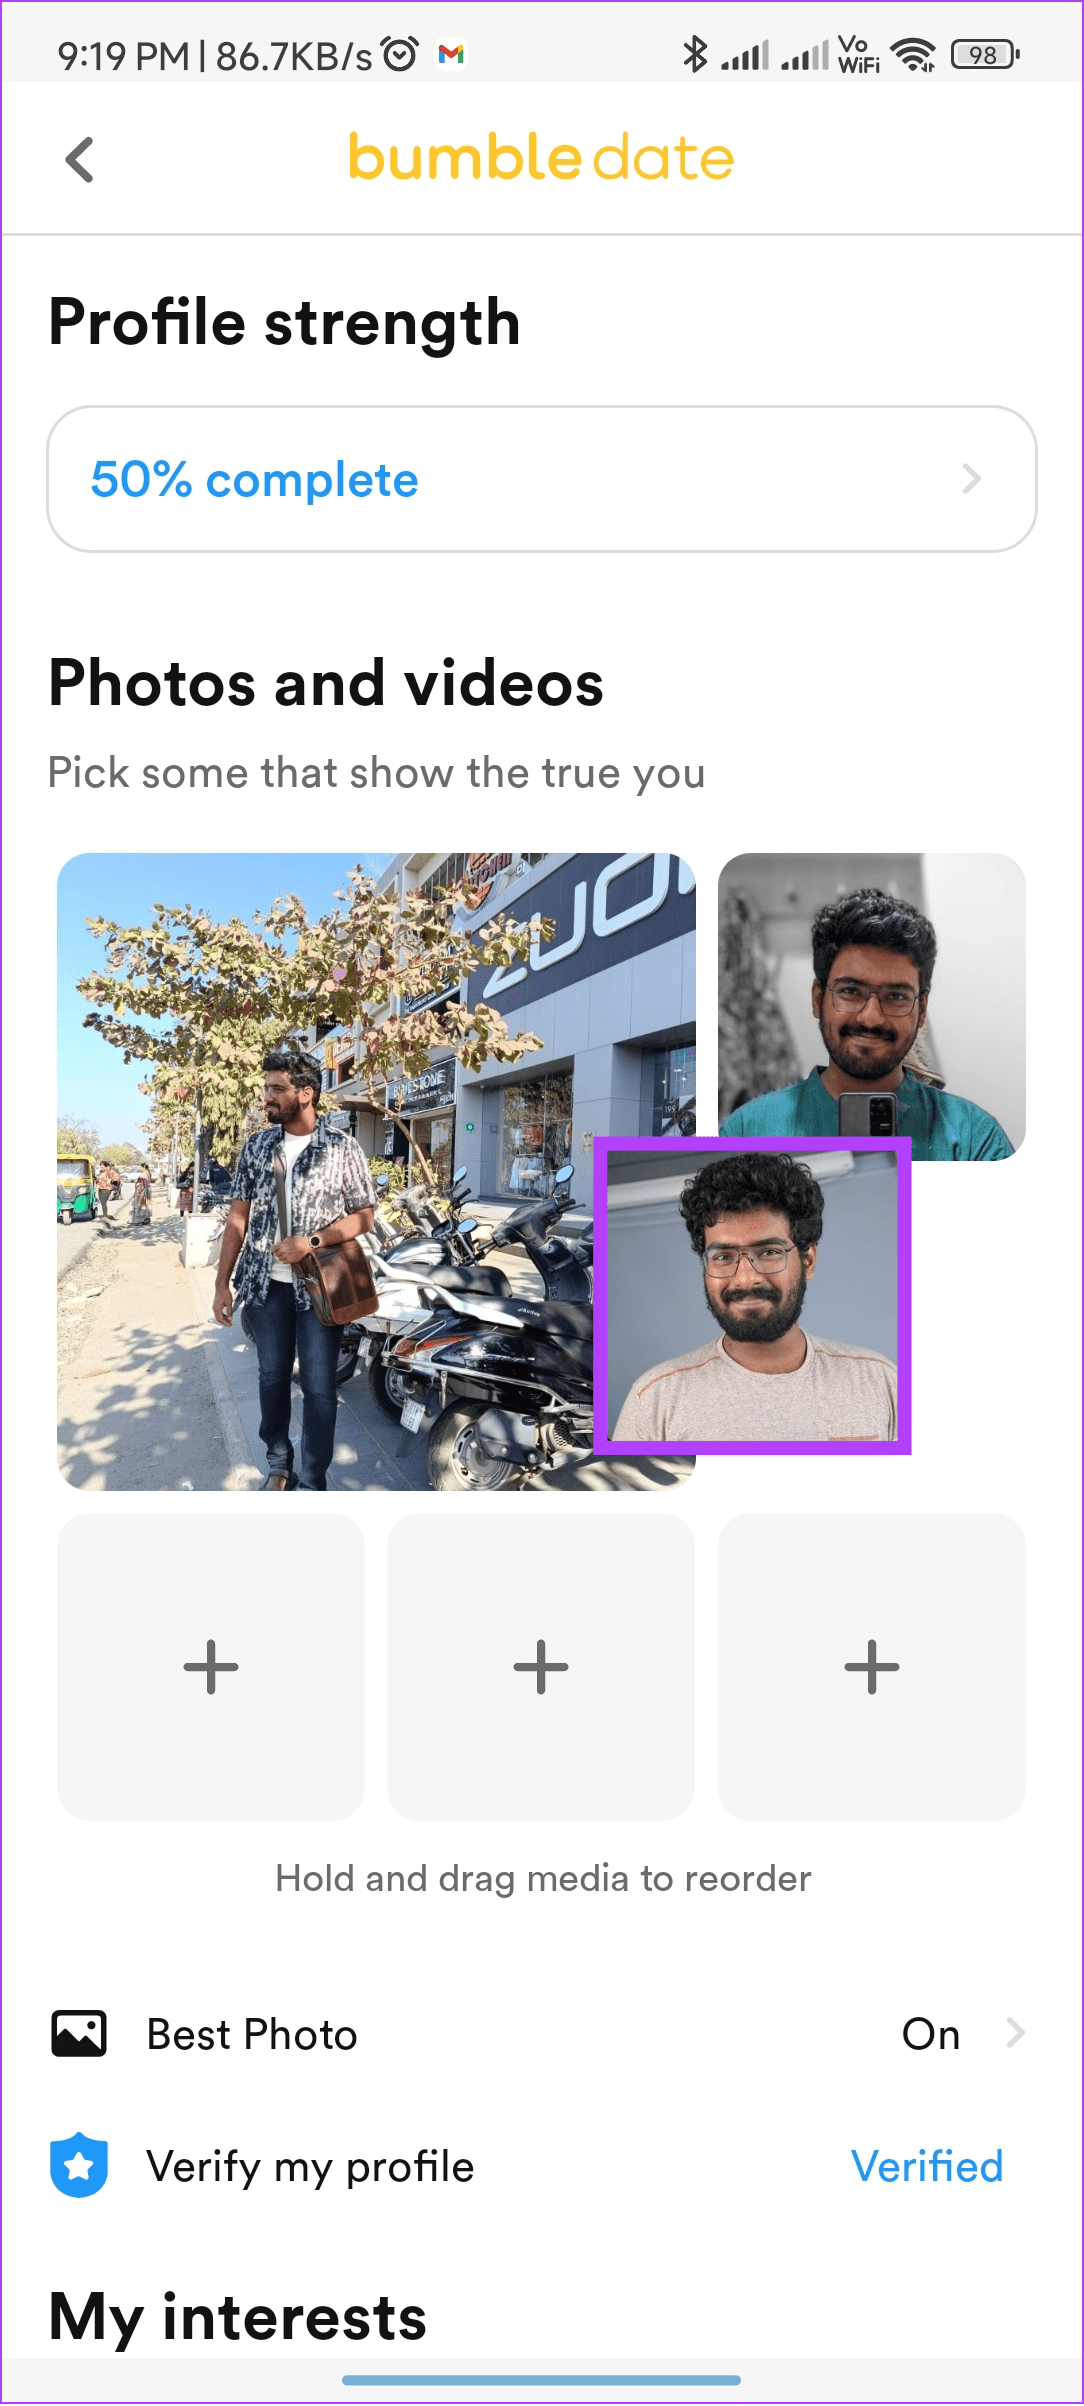 move the image according to your choice